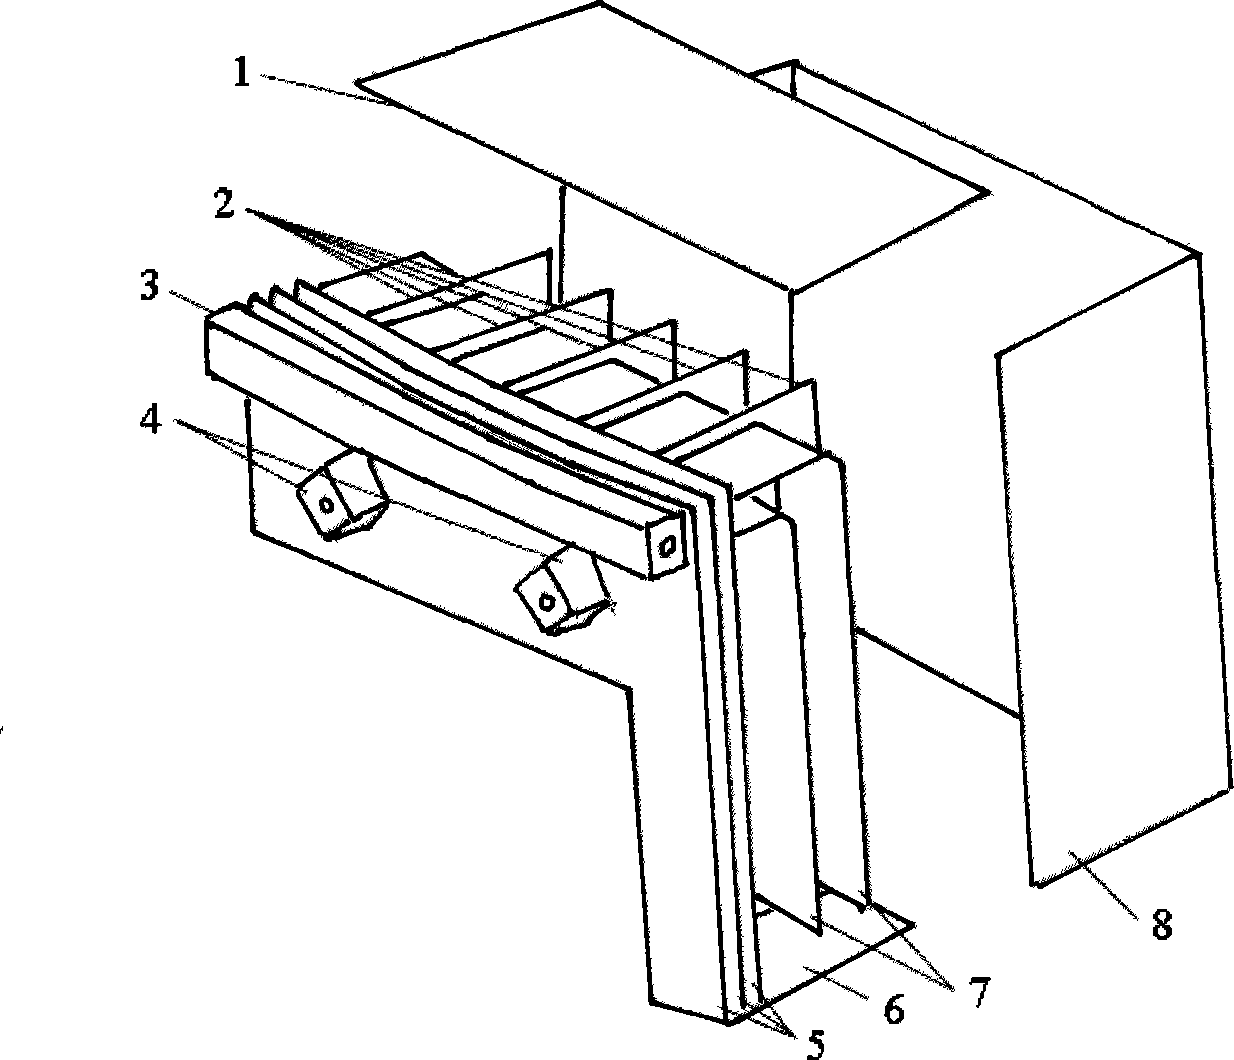 Welding method of thermonuclear reactor experiment cladding modular unit assembly